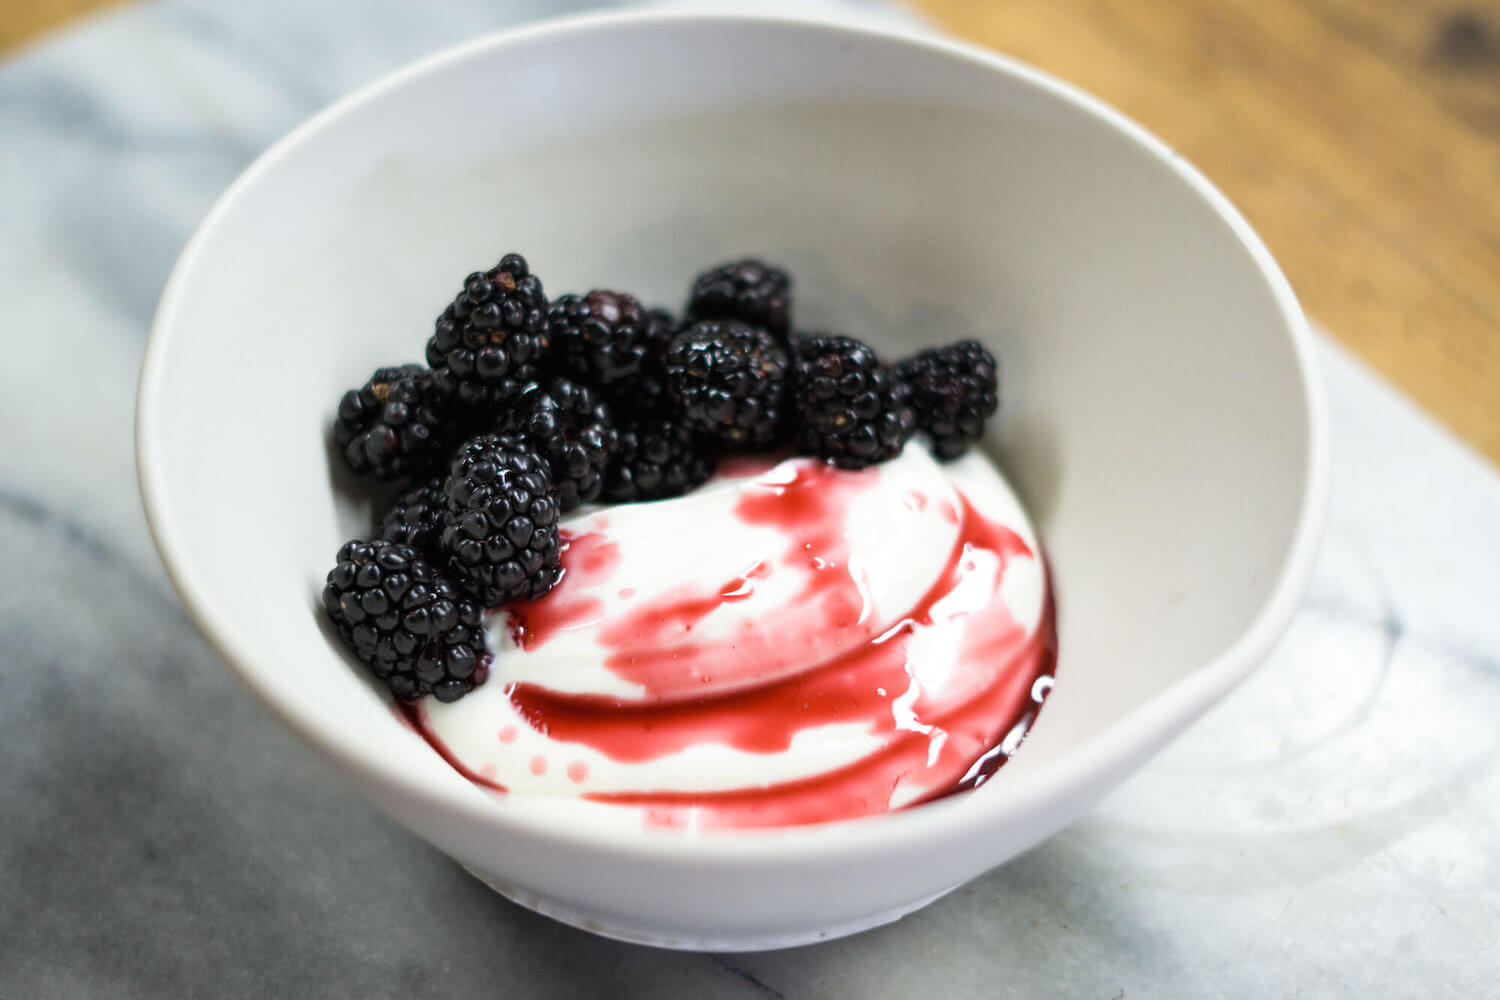 Skyr has the consistency of strained yogurt, and, as a result, is consumed in similar fashion.